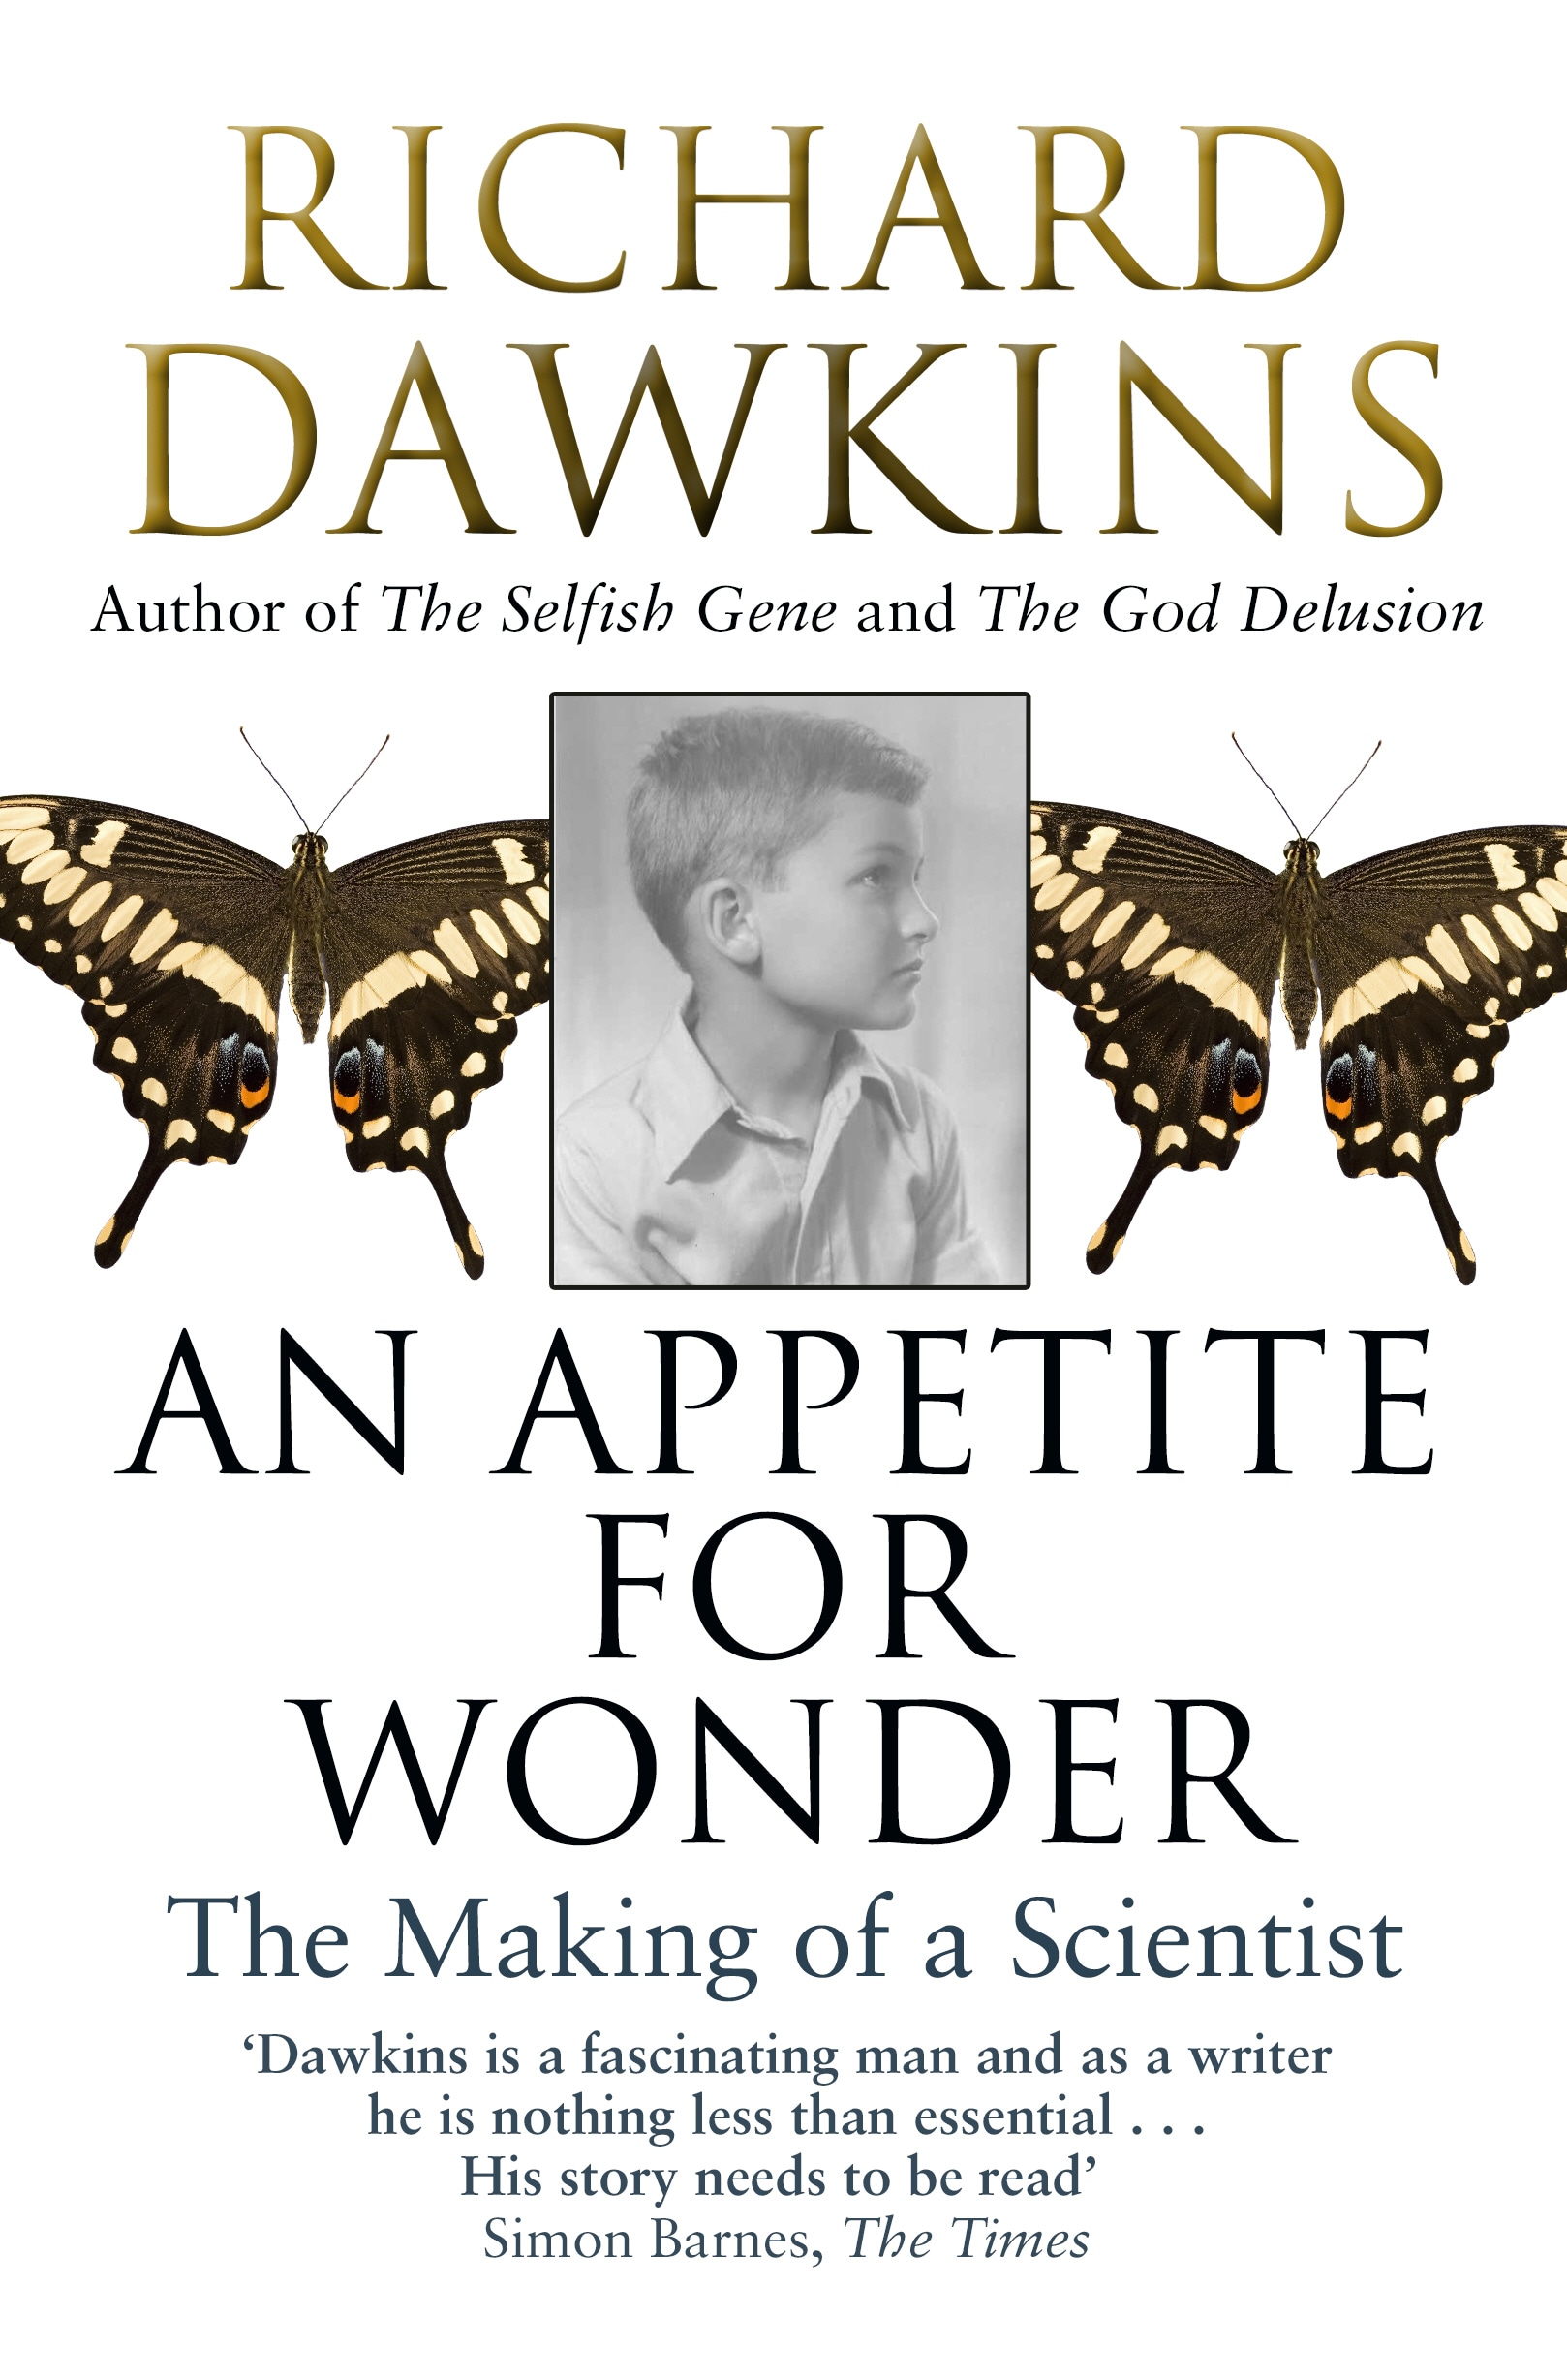 Book “An Appetite For Wonder: The Making of a Scientist” by Richard Dawkins — April 24, 2014